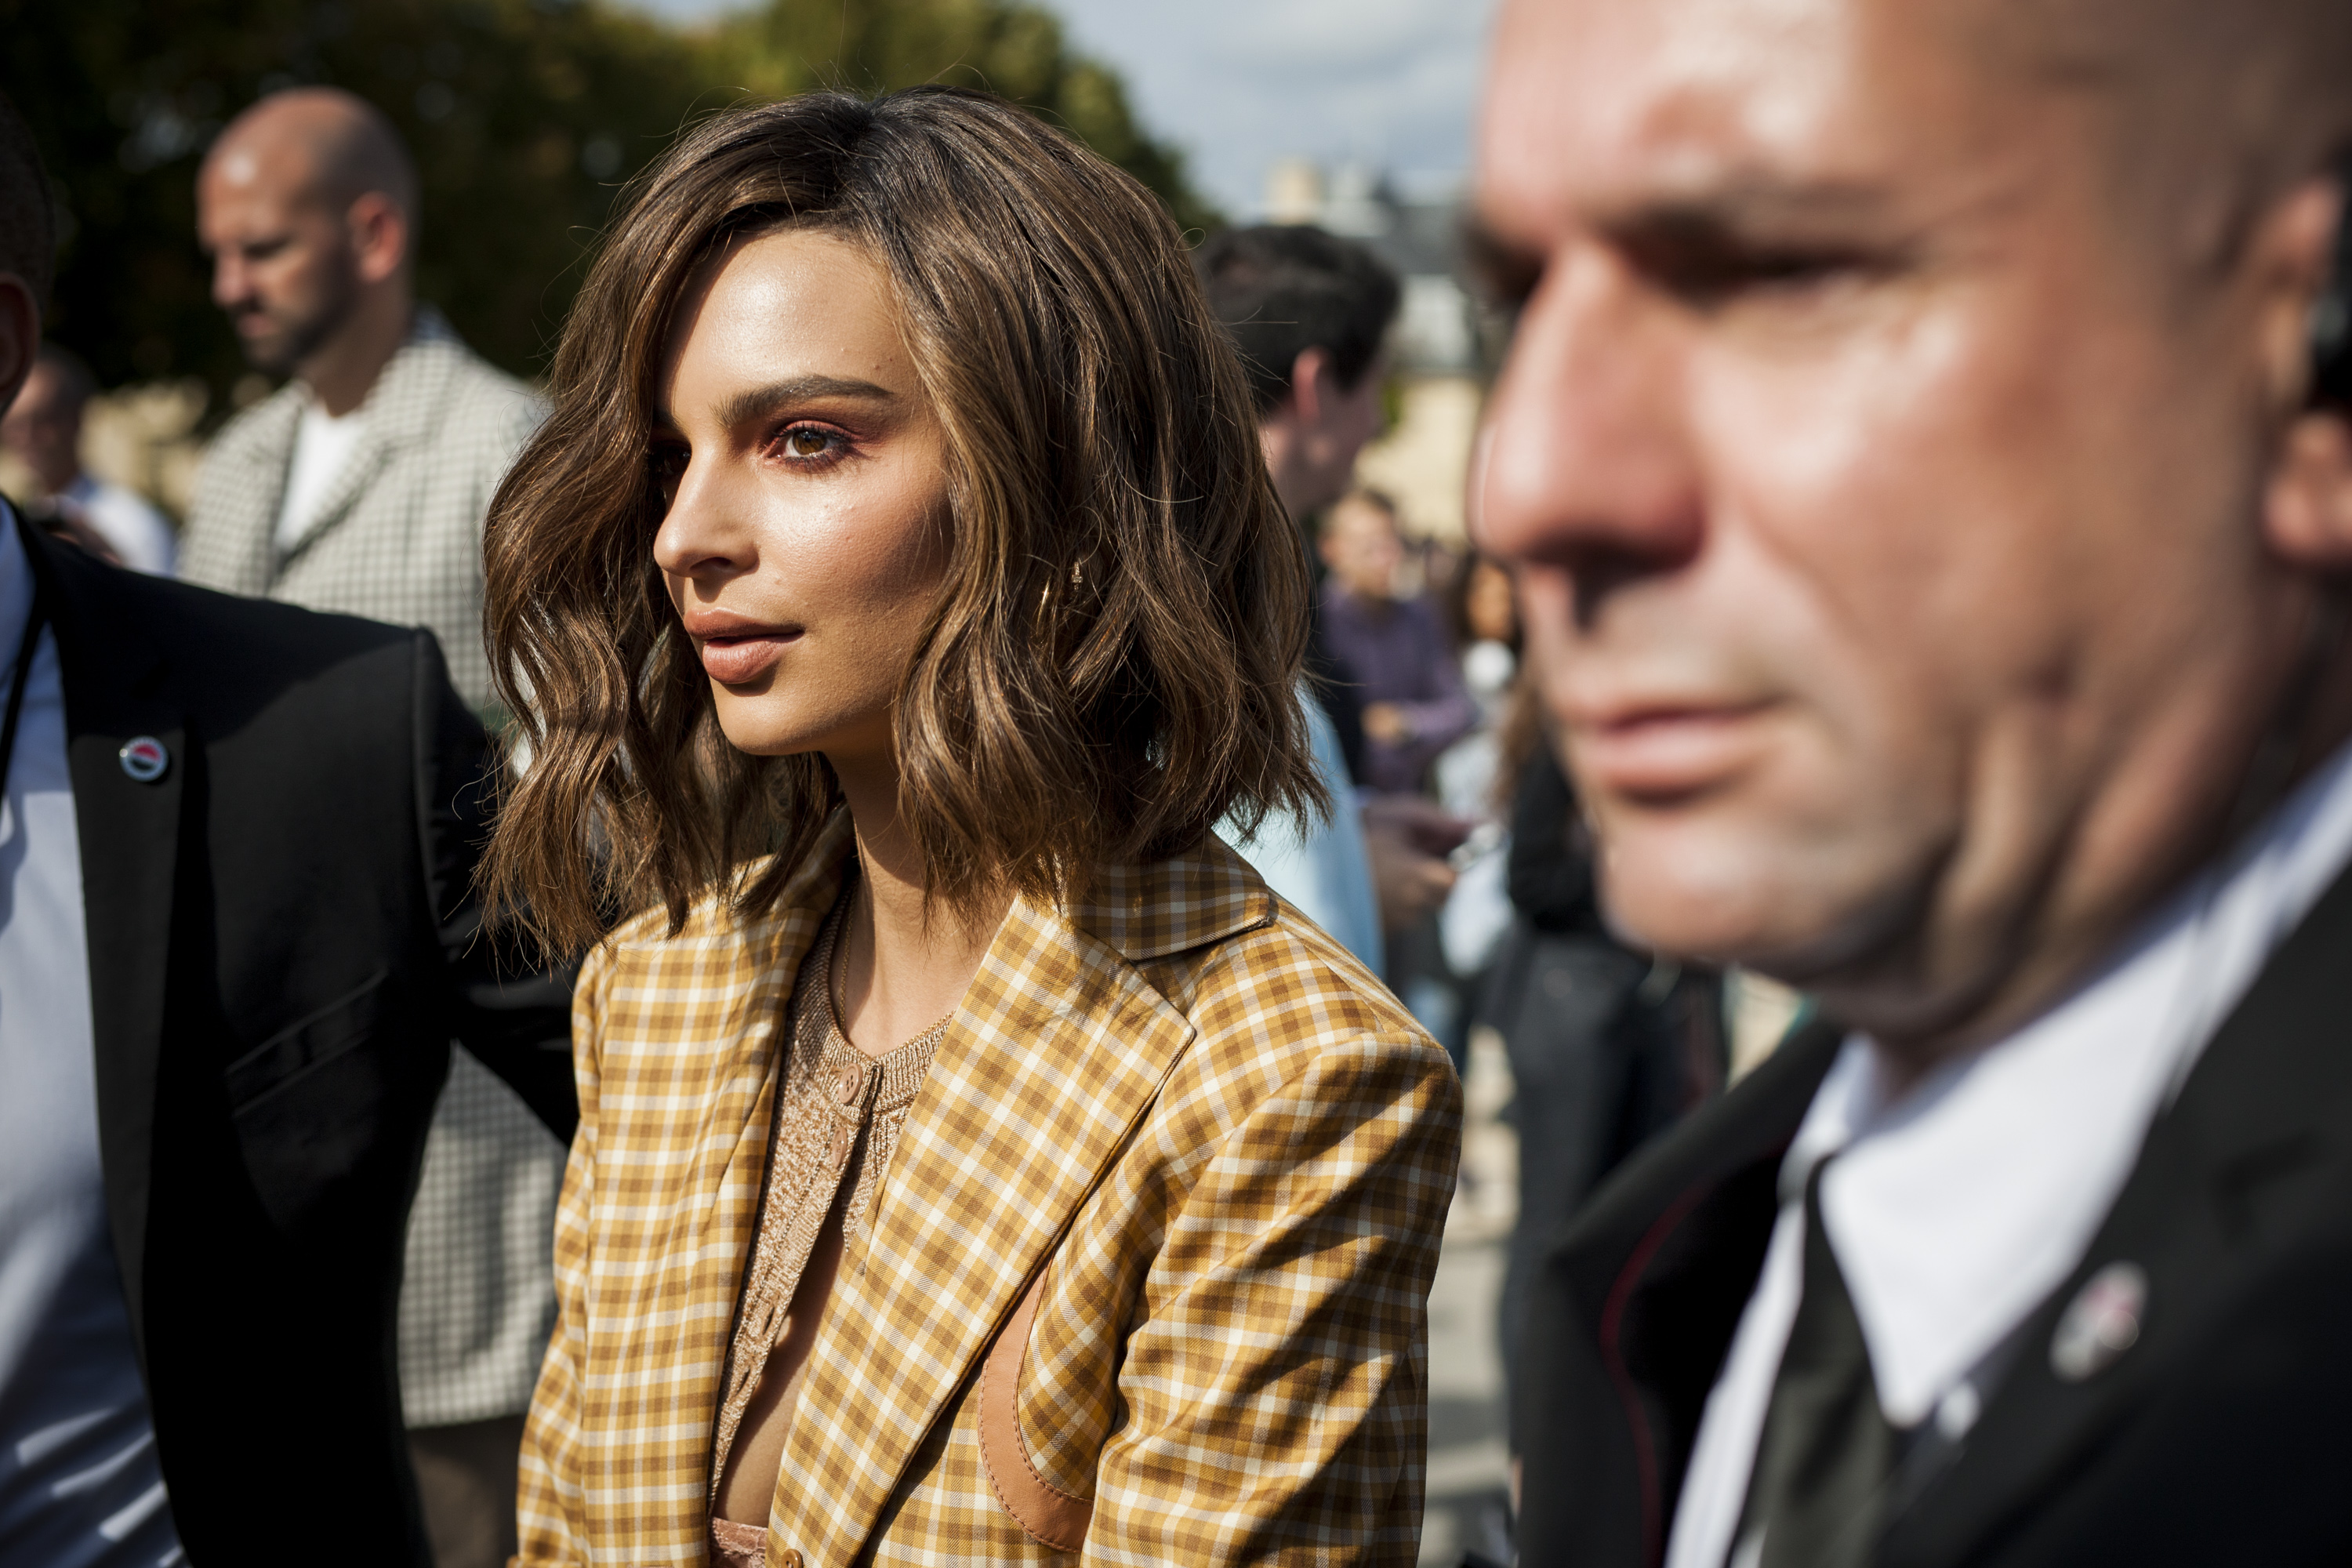 PARIS, FRANCE - SEPTEMBER 29: Emily Ratajkowski is seen after the Nina Ricci show at the Hotel National des Invalides during Paris Fashion Week Womenswear SS18 on September 29, 2017 in Paris, France. (Photo by Claudio Lavenia/Getty Images)